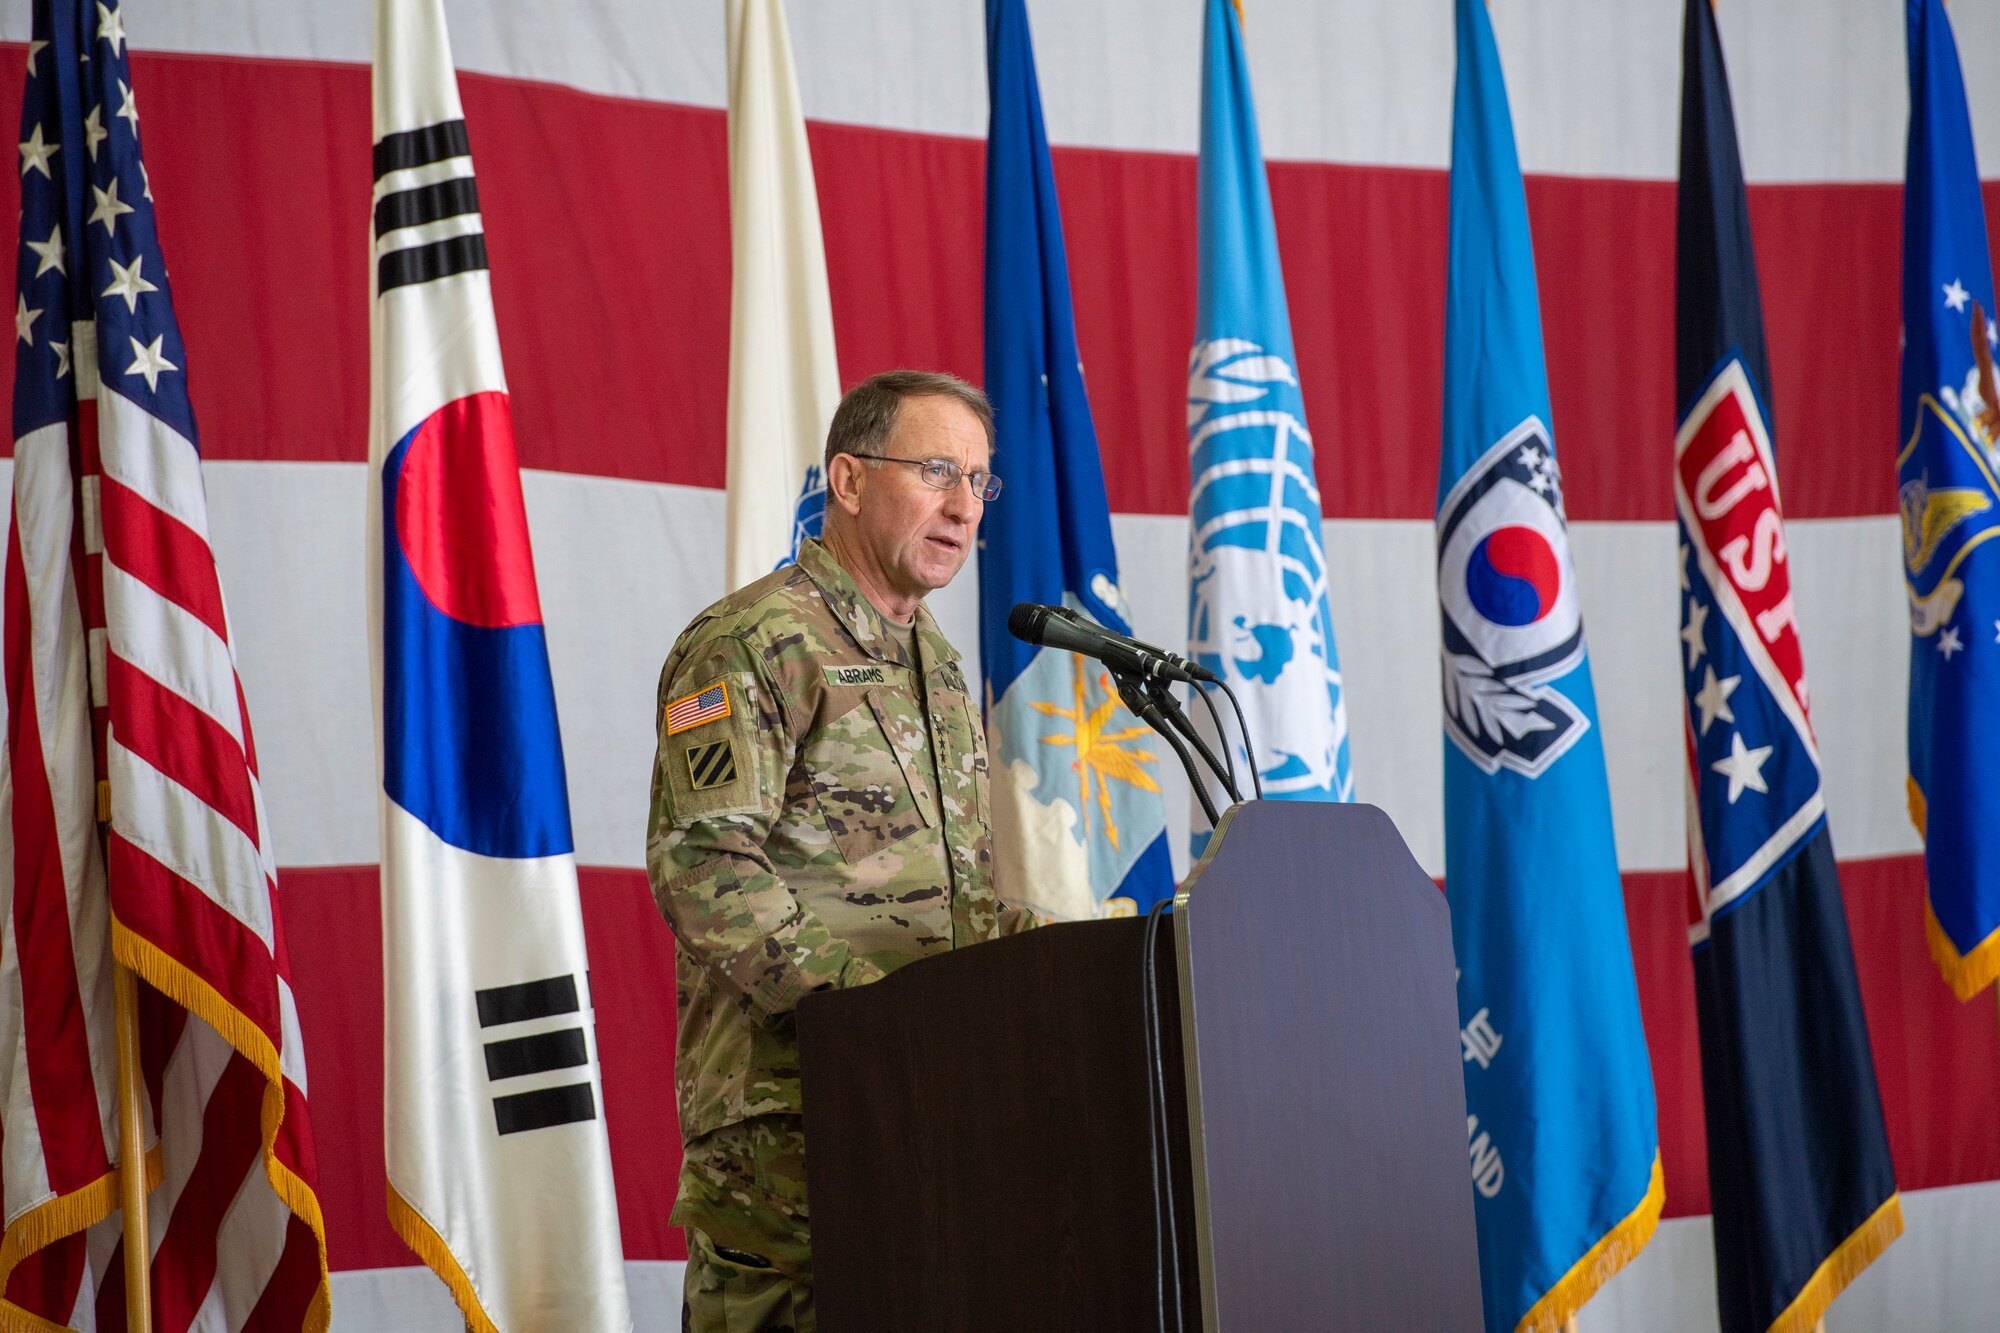 Gen. Robert “Abe” Abrams, Commander, United Nations Command/Combined Forces Command/United States Forces Korea, delivers a speech as the presiding official over the change of command of the Air Component Command and the change of responsibility for the deputy commander of USFK at Osan Air Base, ROK, June 12, 2020. Abrams spoke on the outbound party, Lt. Gen. Kenneth S. Wilsbach, and the inbound party, Lt. Gen. Scott L. Pleus. (U.S. Air Force photo by Senior Airman Darien Perez)